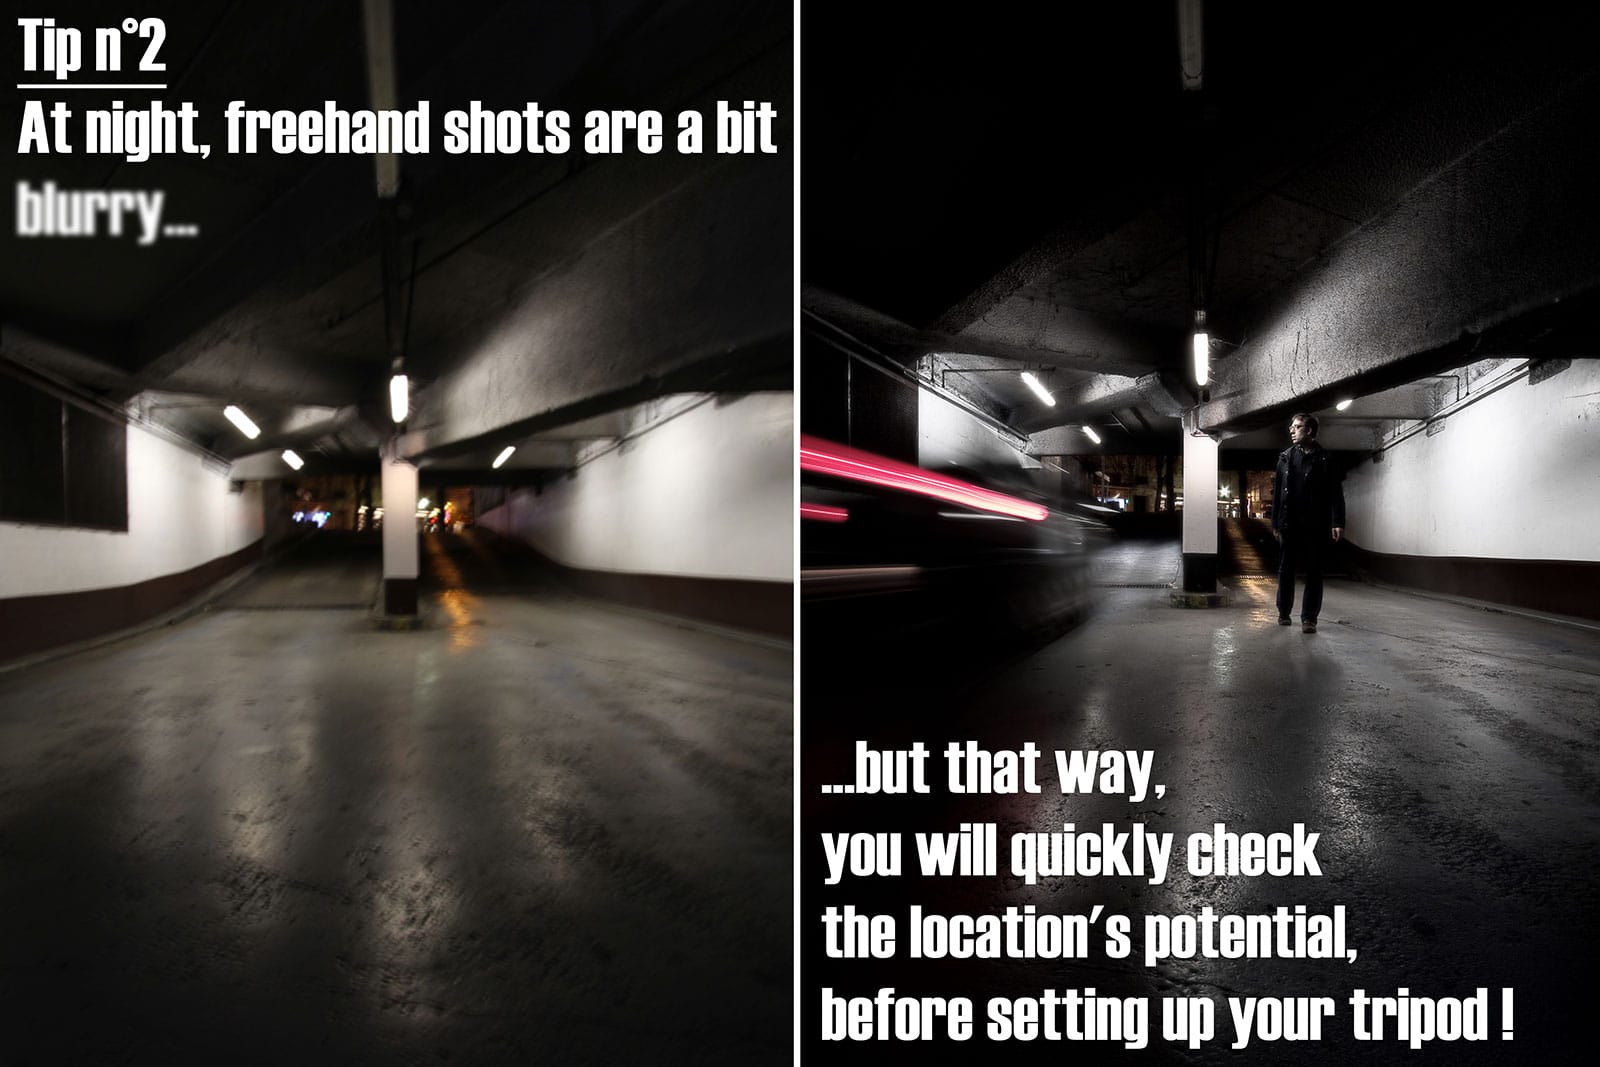 Night photography tip 2 - Freehand shots